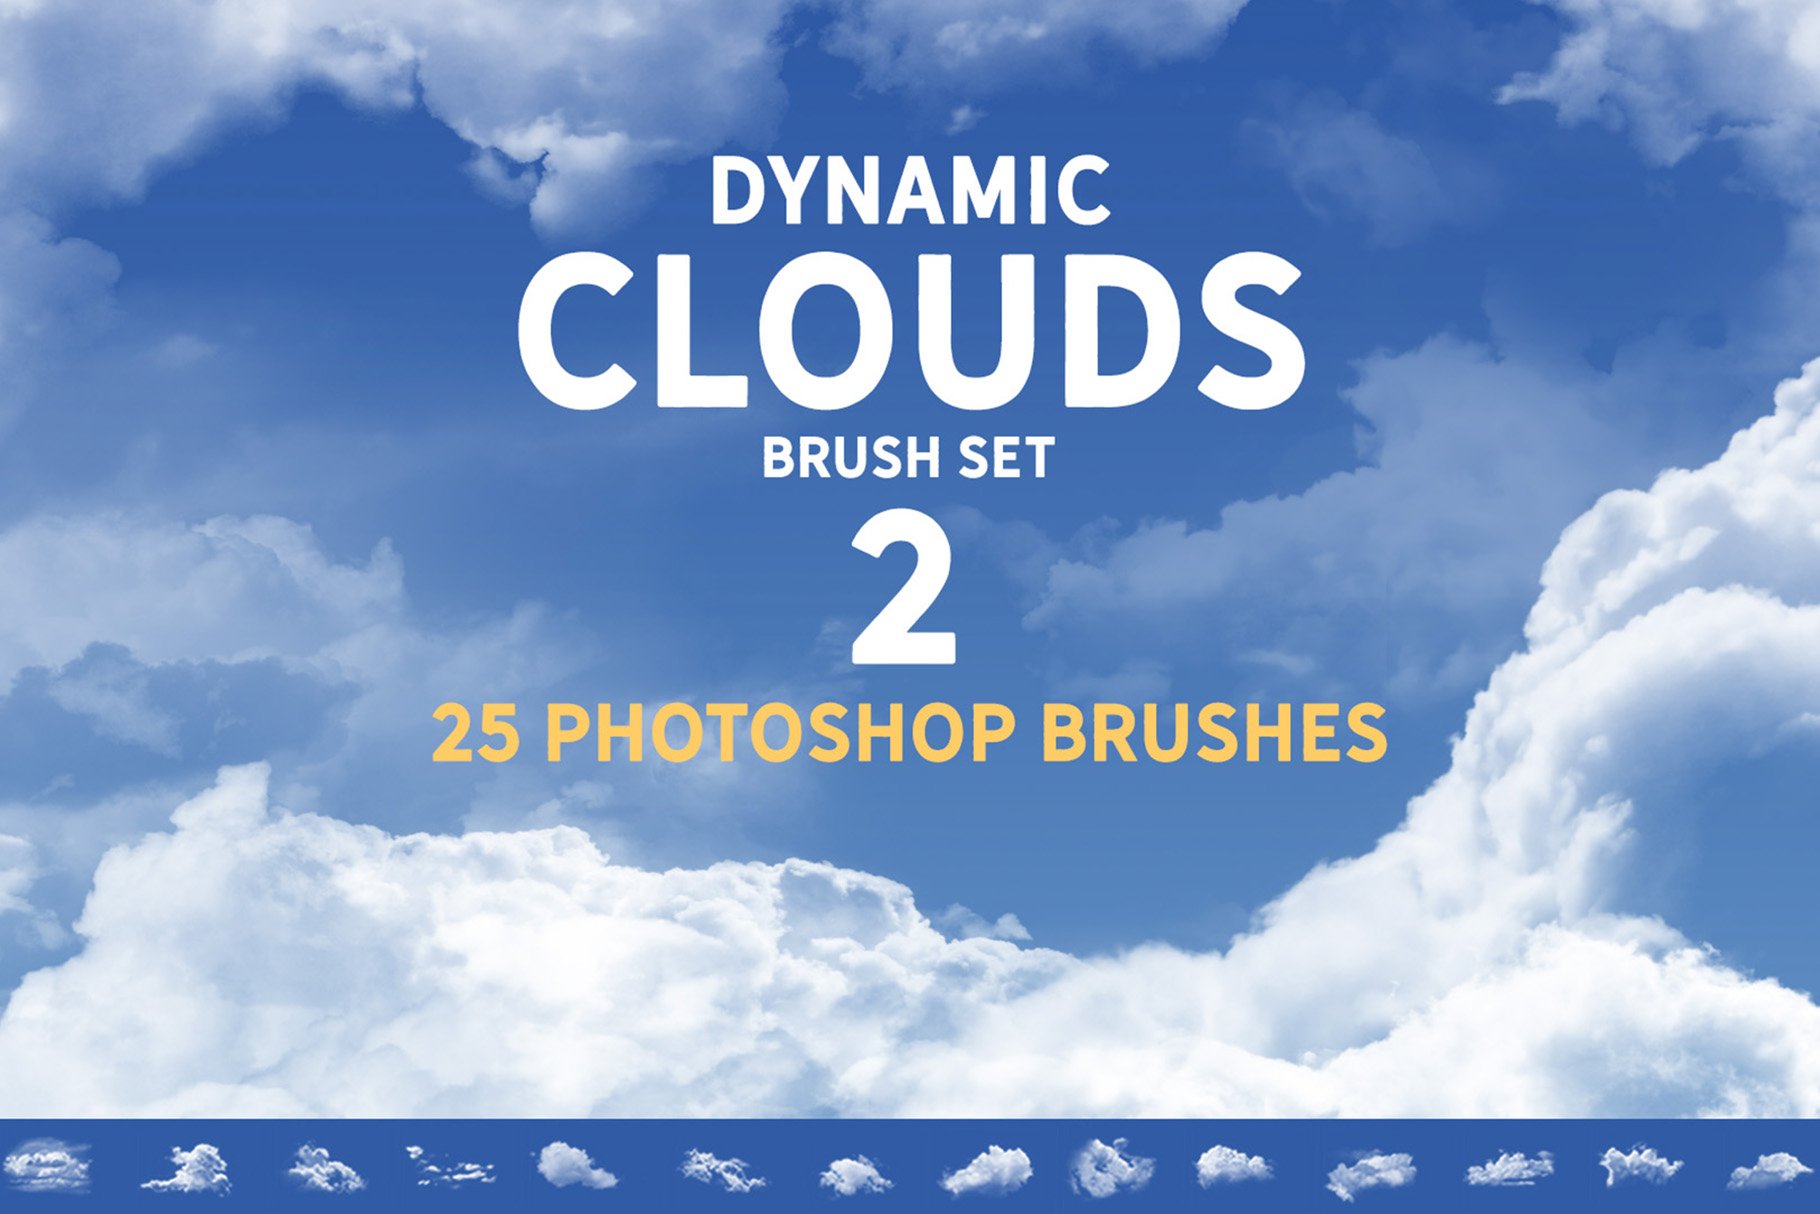 Dynamic clouds brush set 2cover image.